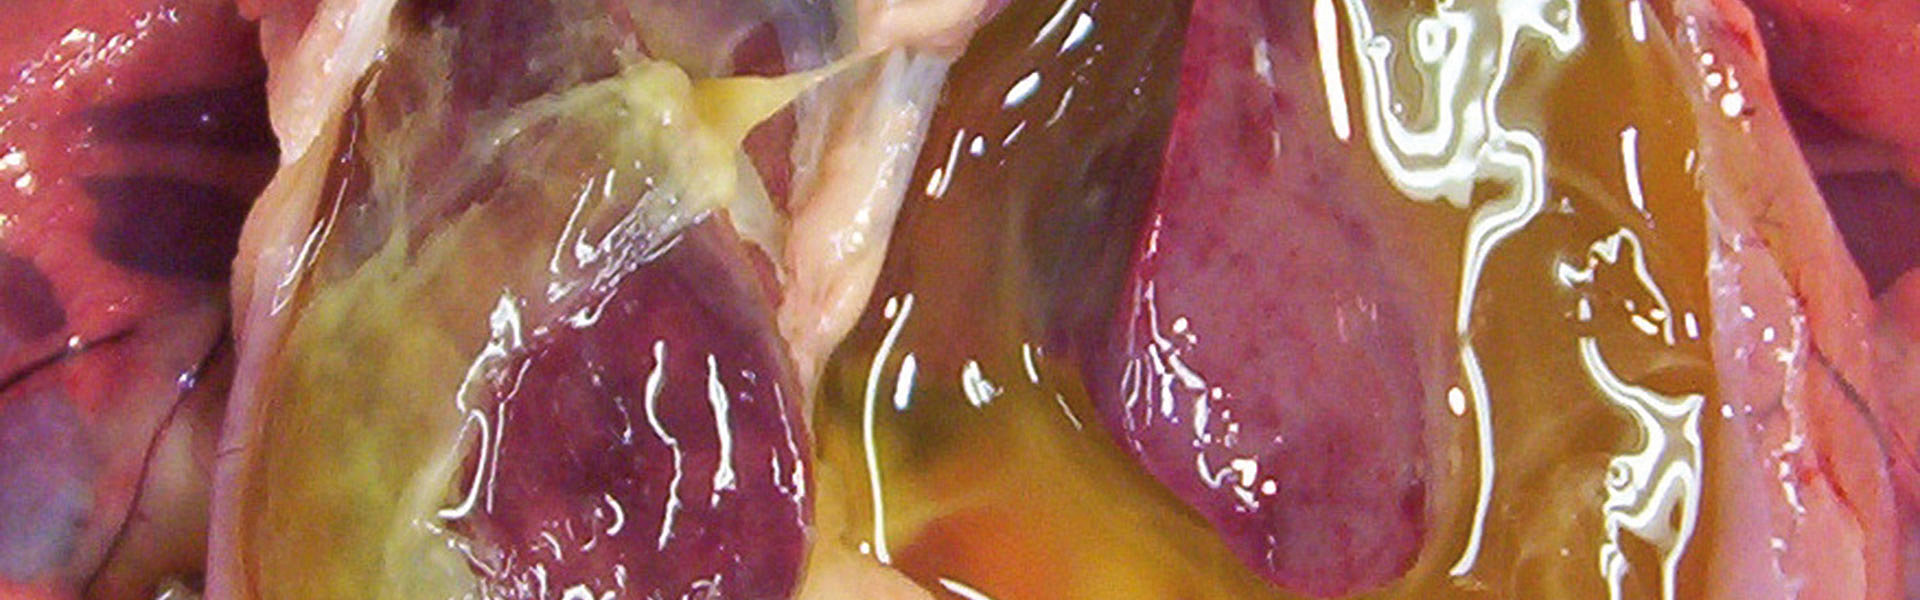 Sign of ascites in chickens: Opened abdominal cavity of an ascitic broiler chicken showing the abundance of ascitic fluid